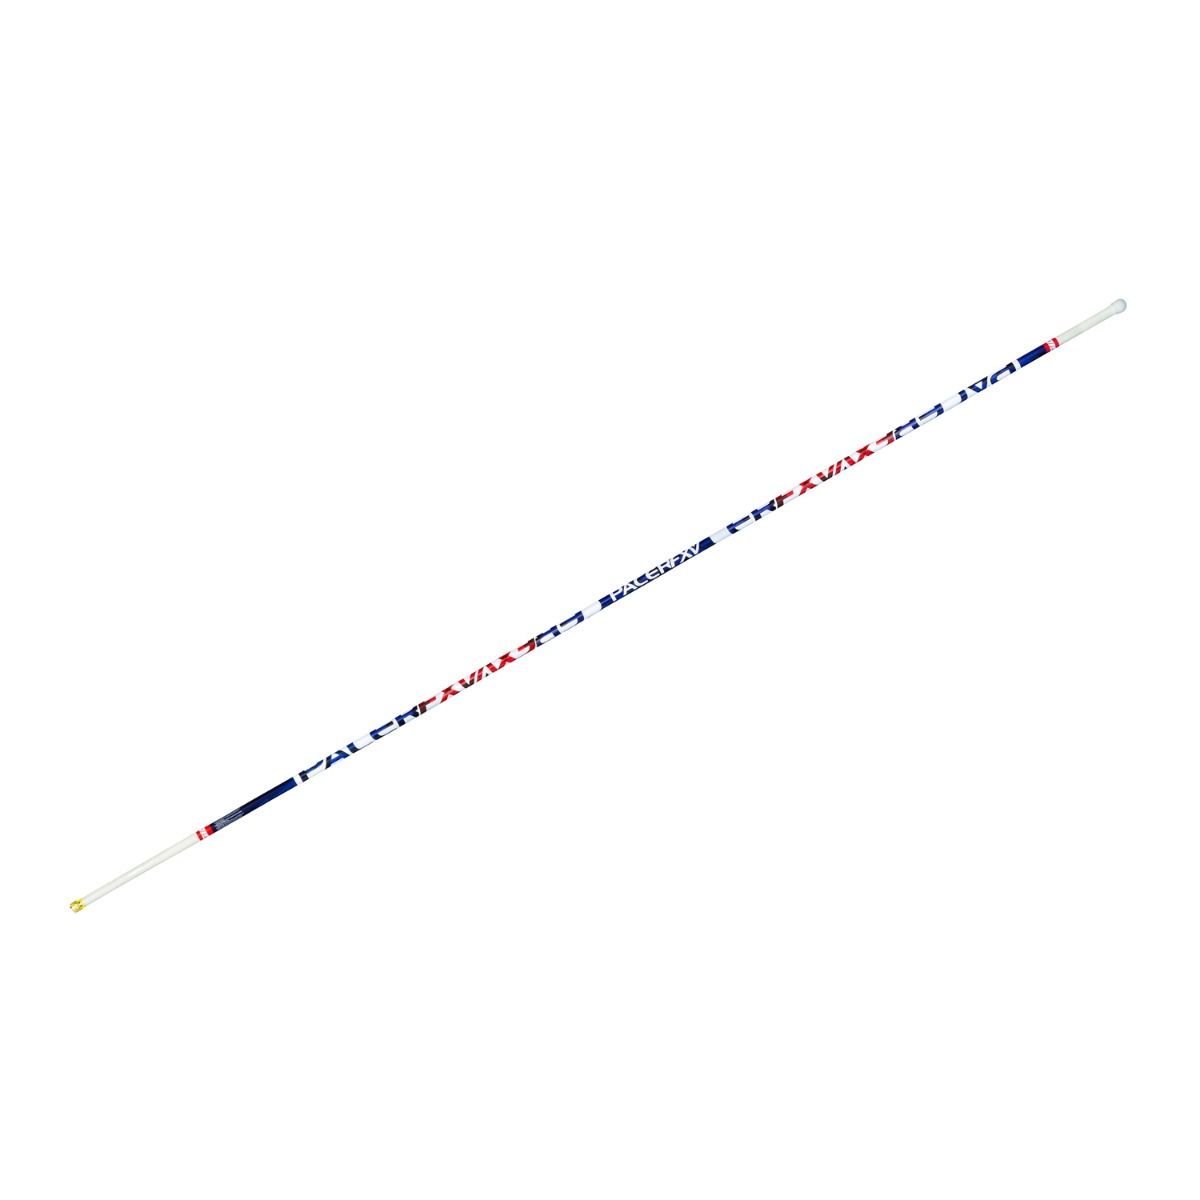 Gill PacerFXV 11' Vaulting Pole